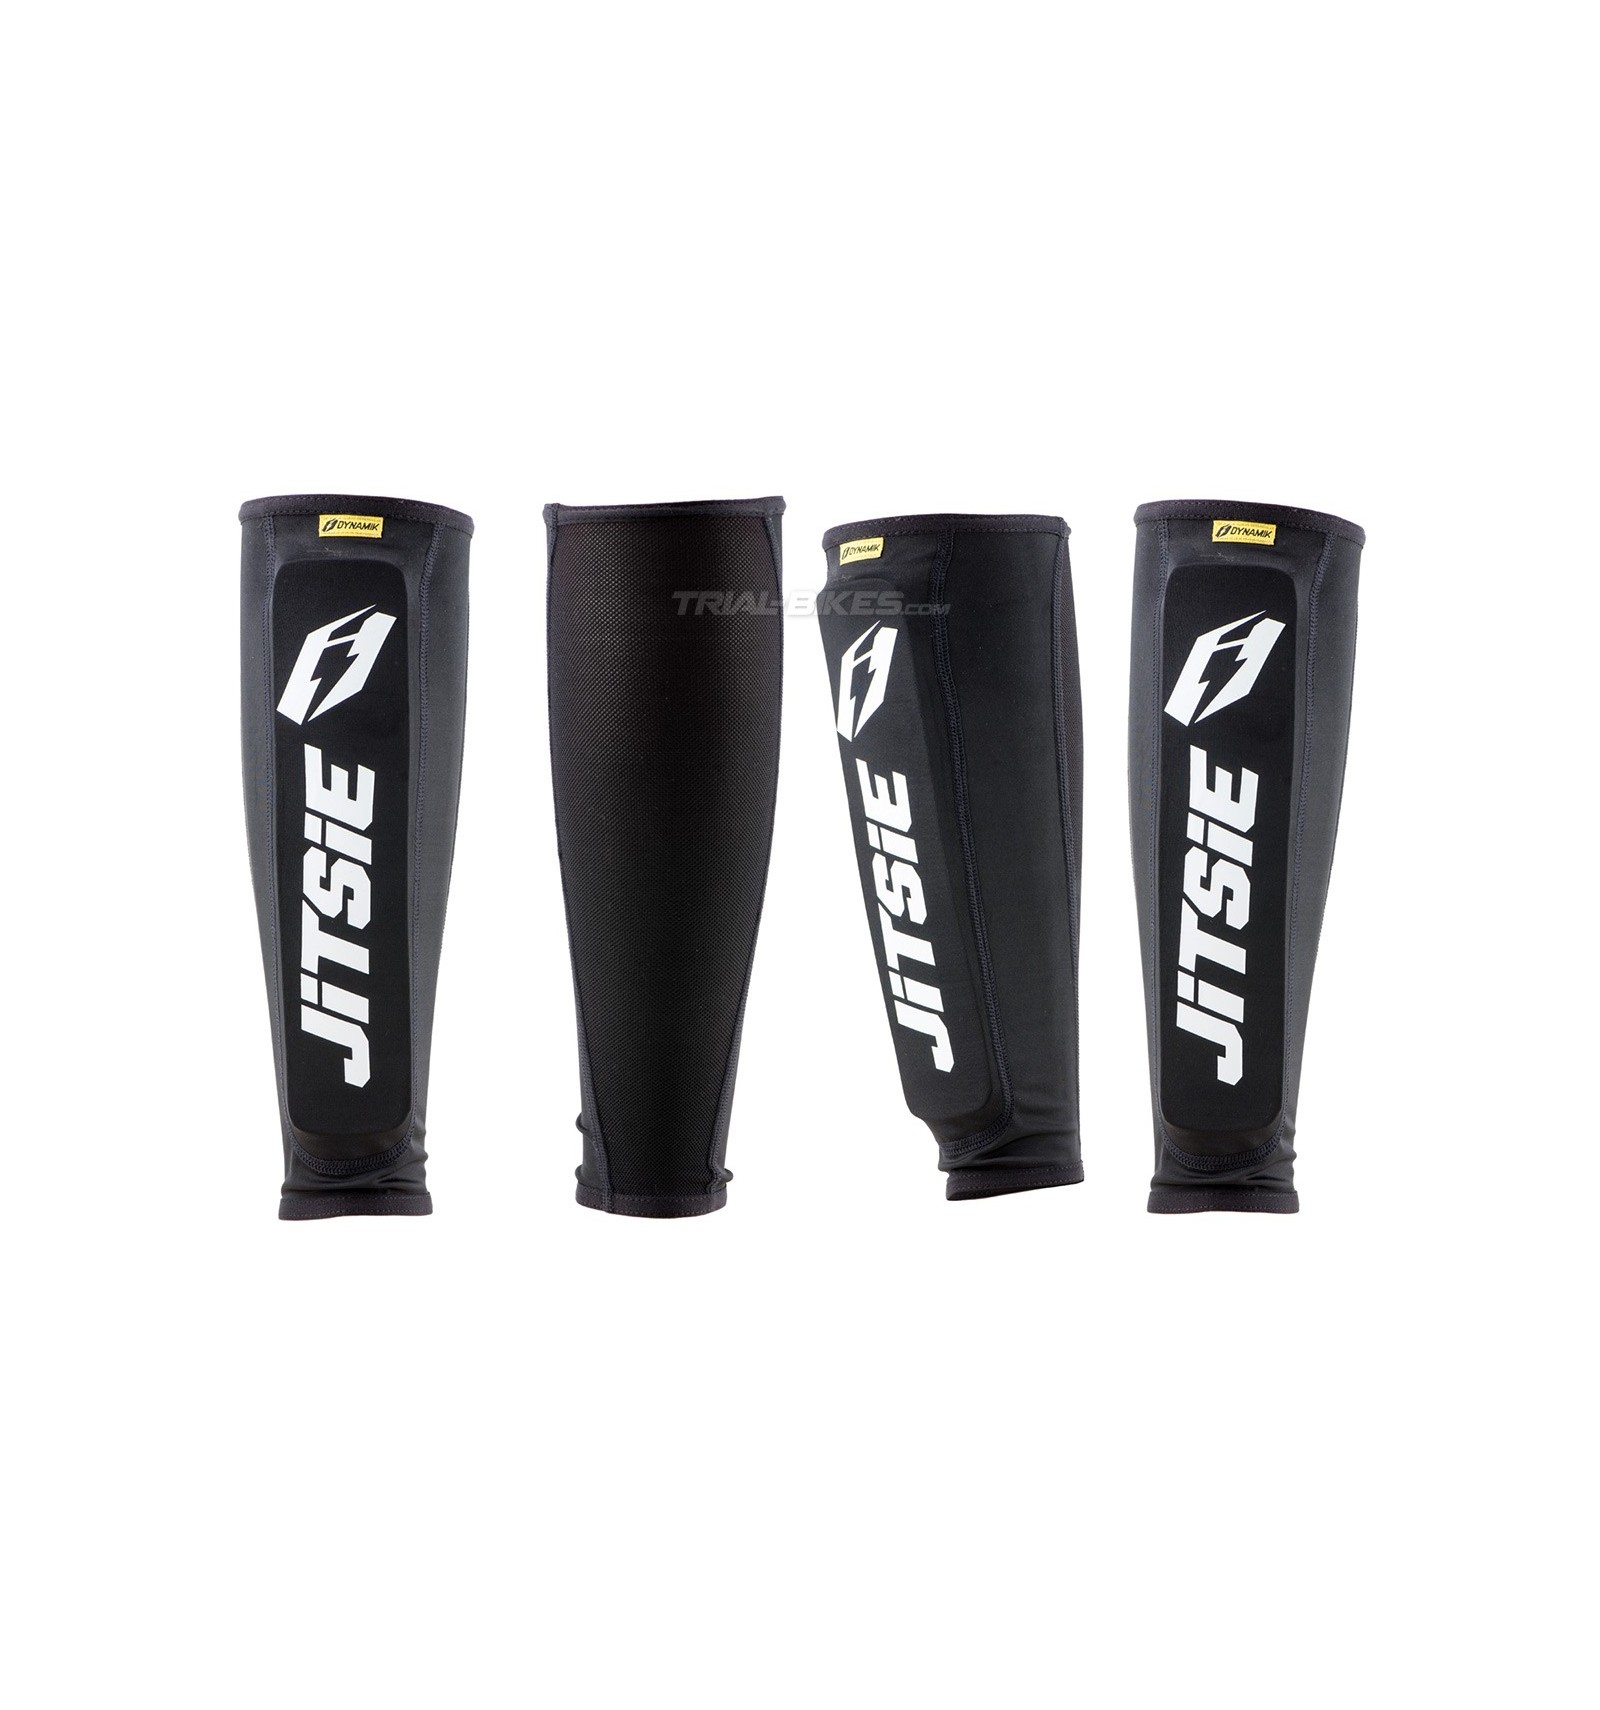 Youth/Junior/Child Trials/Cycle/Offroad Jitsie Kids Dynamik Long Knee Guards 